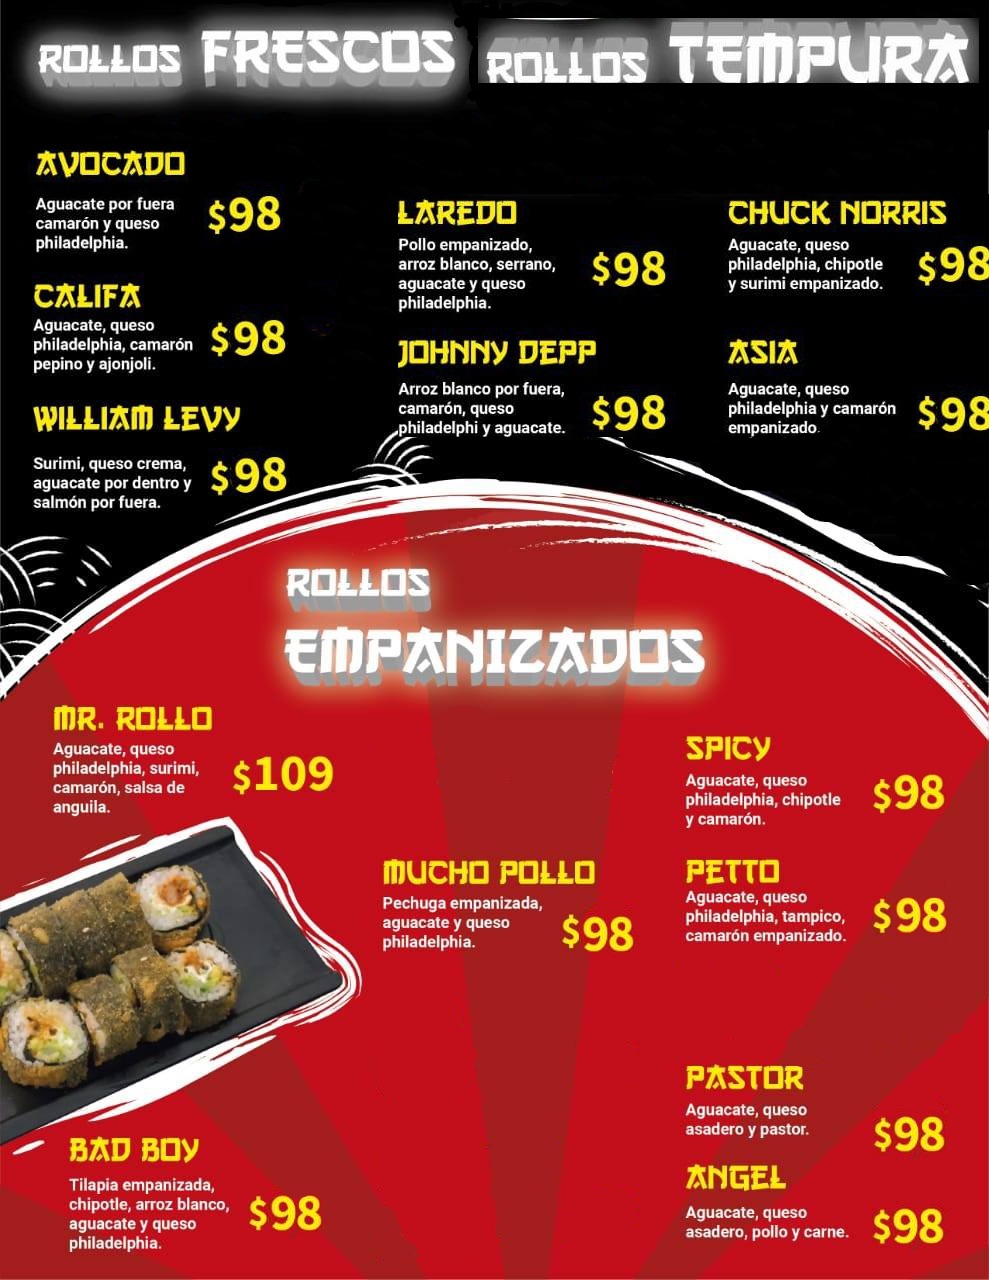 Mr. Rollo Sushi n Burger | Calle Anáhuac 3351, Campestre, 88278 Nuevo Laredo, Tamps., Mexico | Phone: 867 714 7652